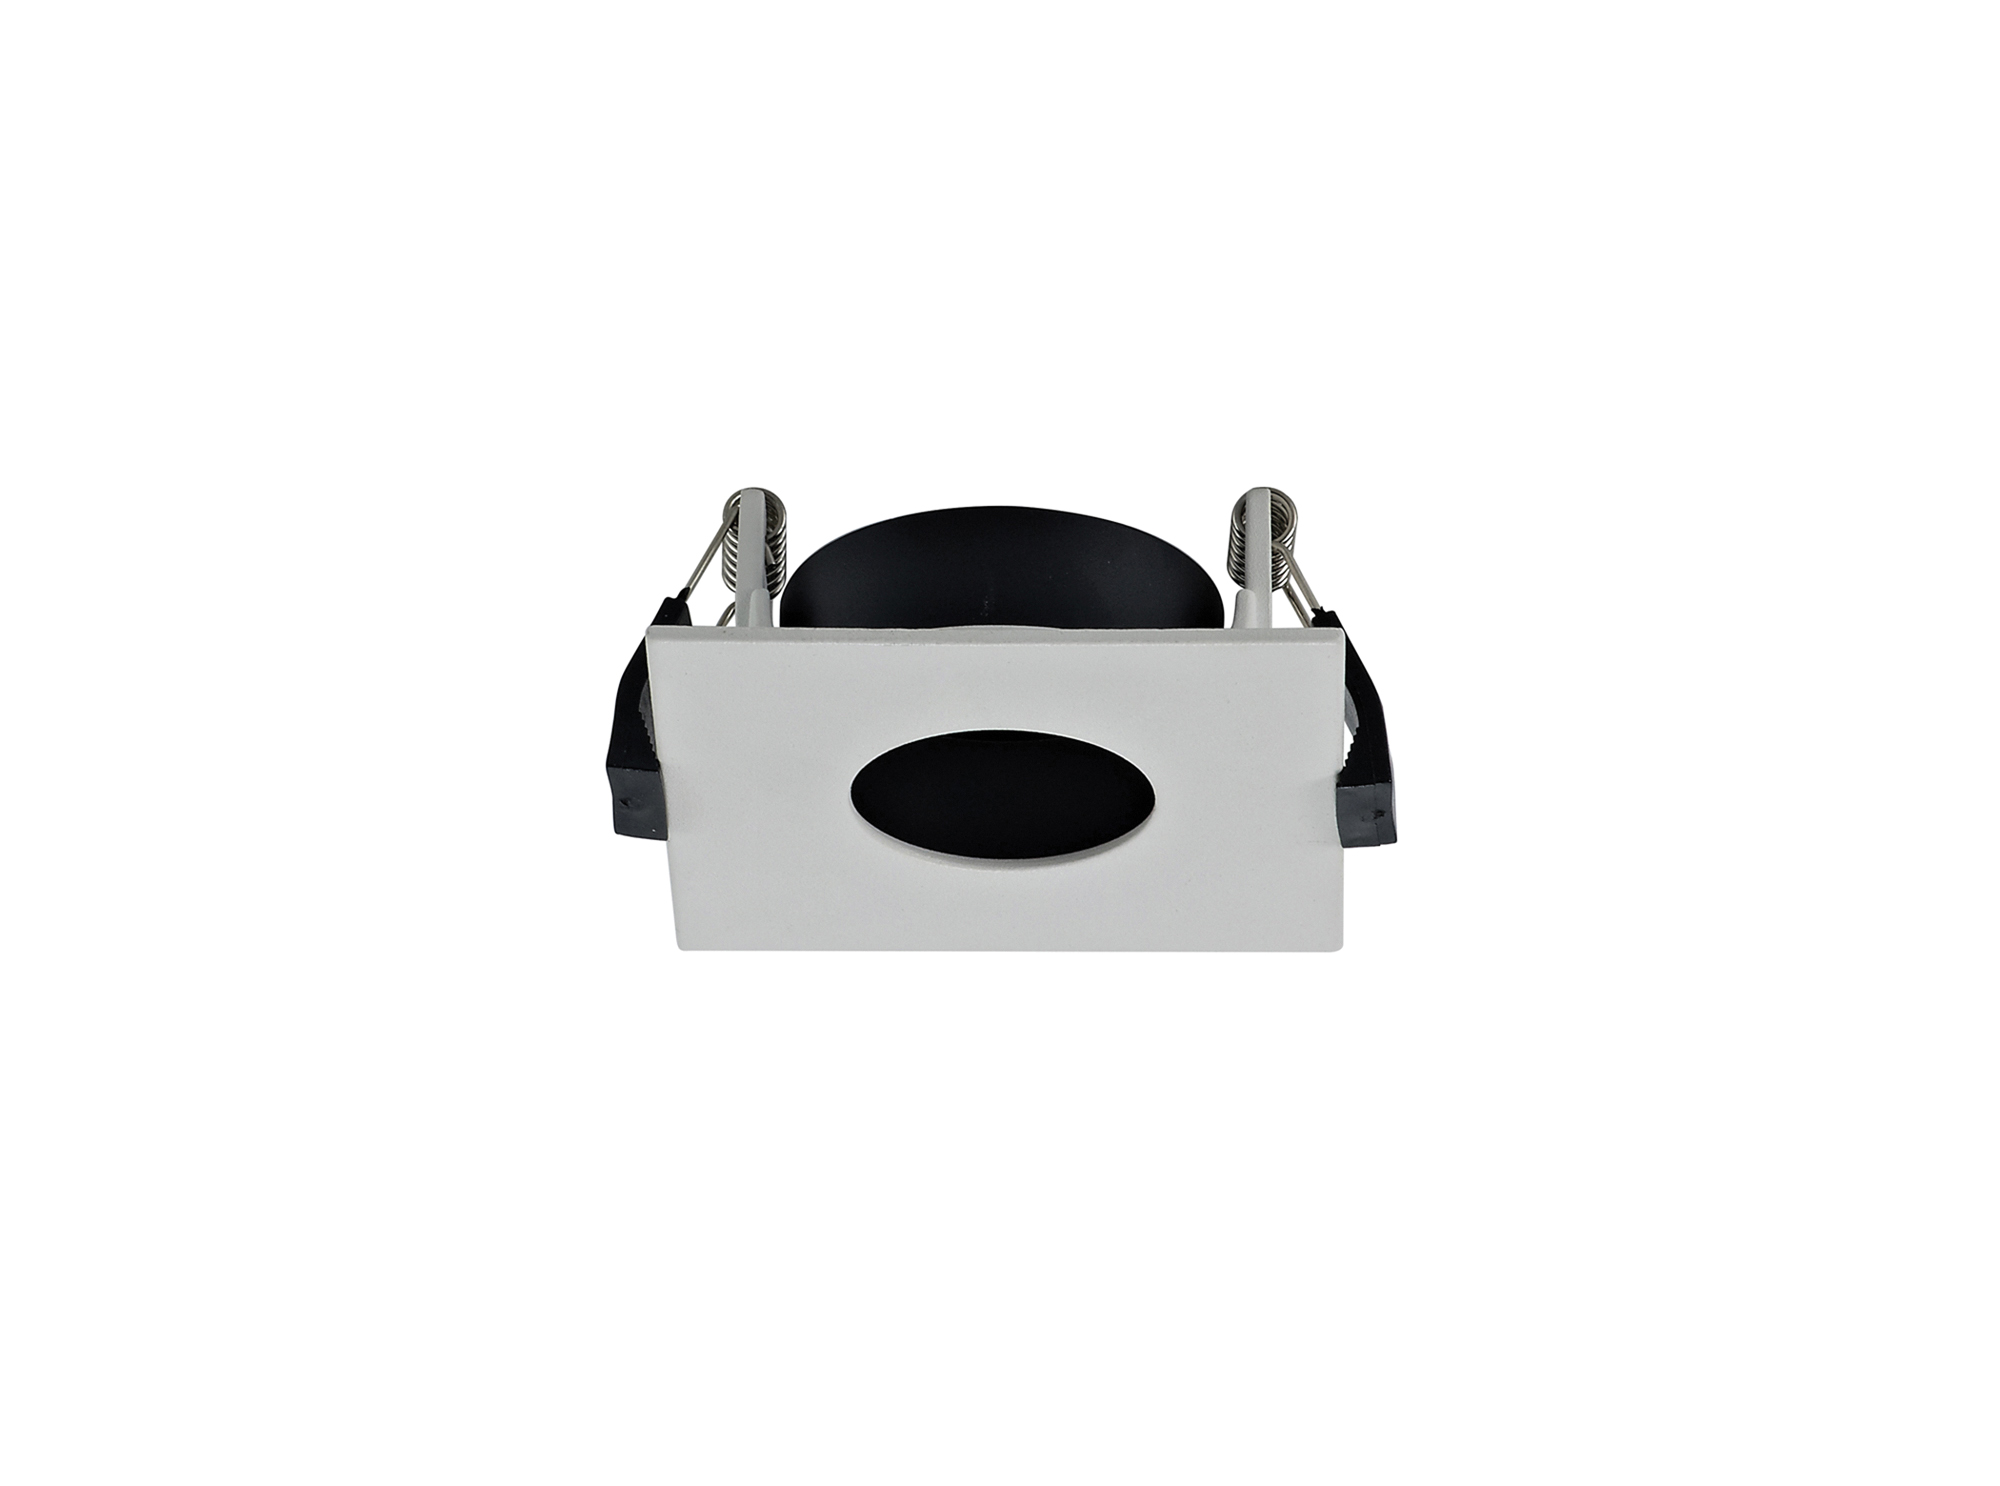 DX200366  Blate, White Recessed Square Plate with Round Pinhole Spotlight - LED ENGINE REQUIRED, 83x83mm, Cut Out: 76mm, 3yrs Warranty